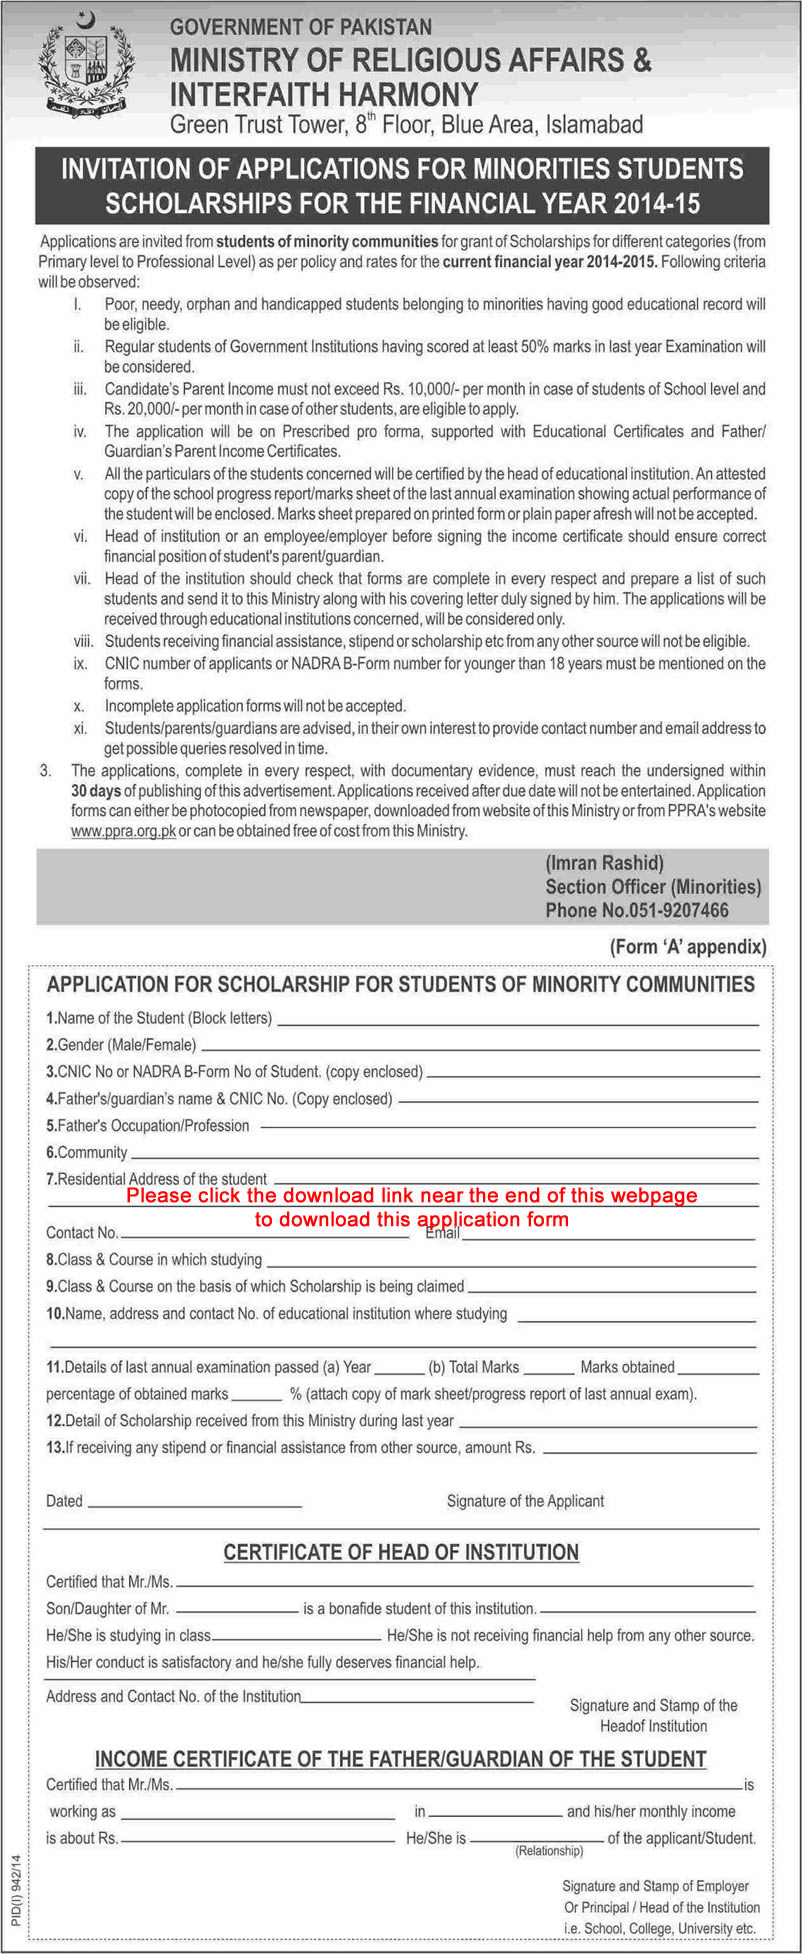 Scholarships for Minorities Students 2014-15 Application Form - Ministry of Religious Affairs